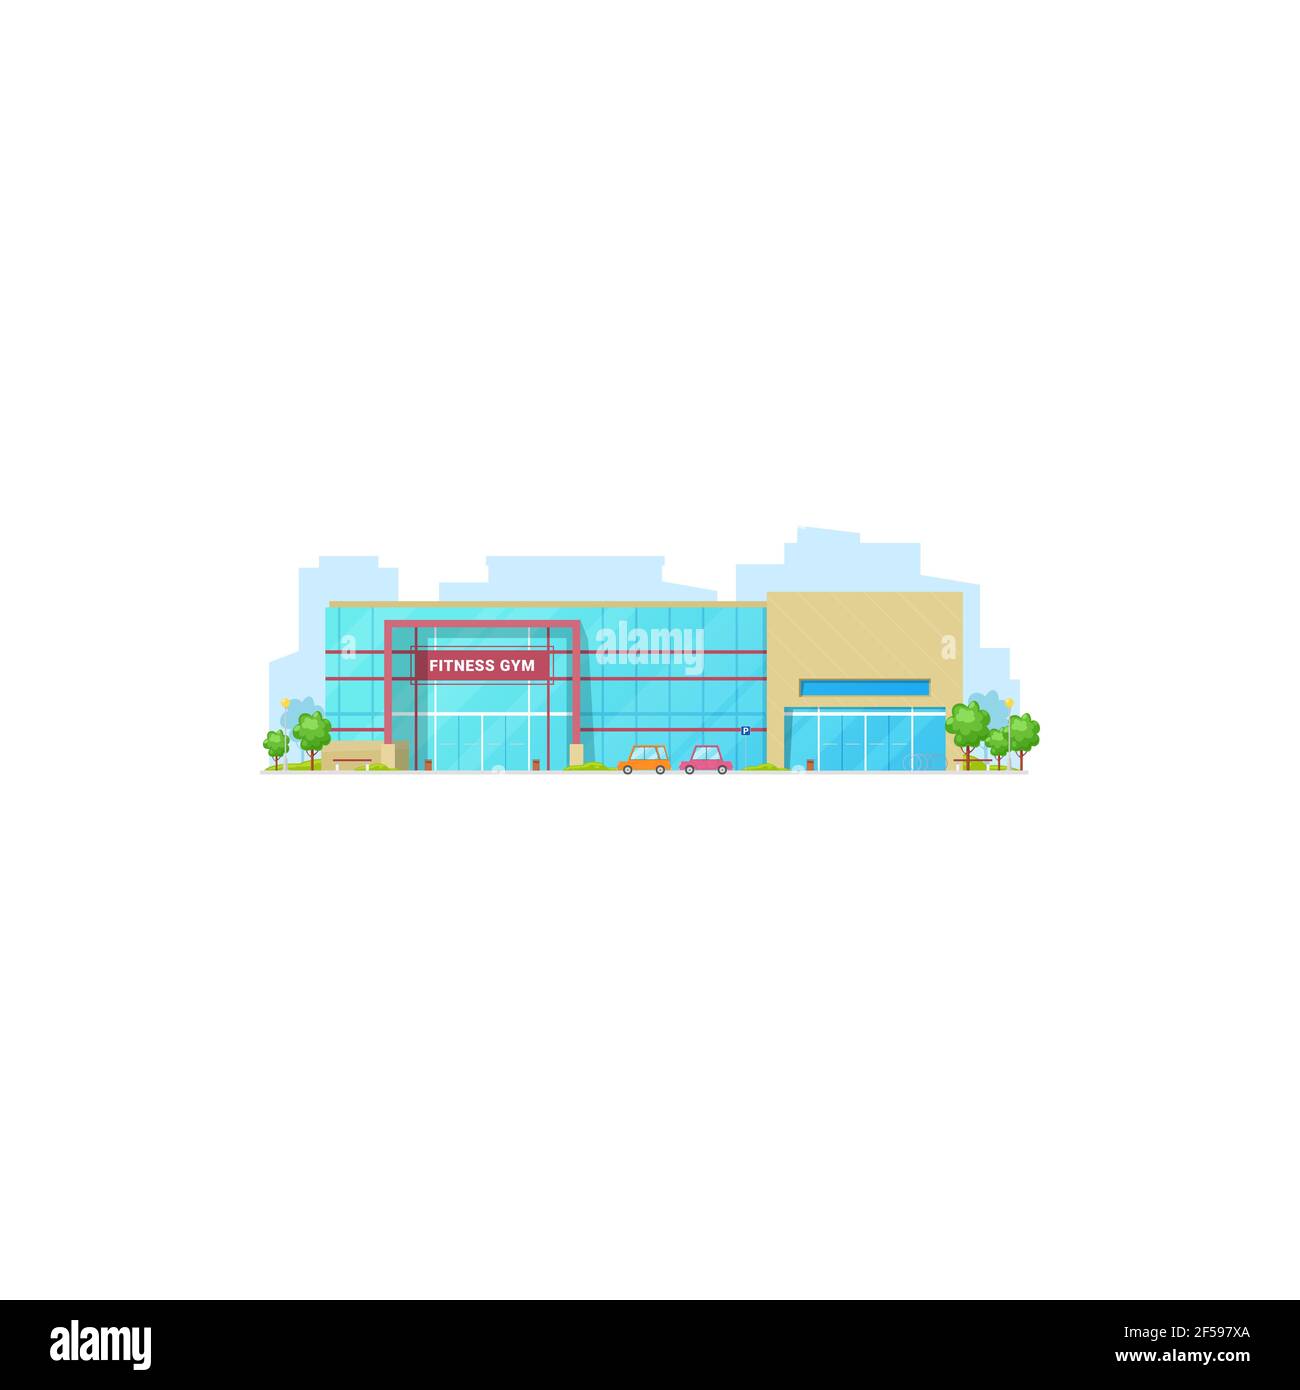 Gym architecture fitness center building isolated Stock Vector Image ...